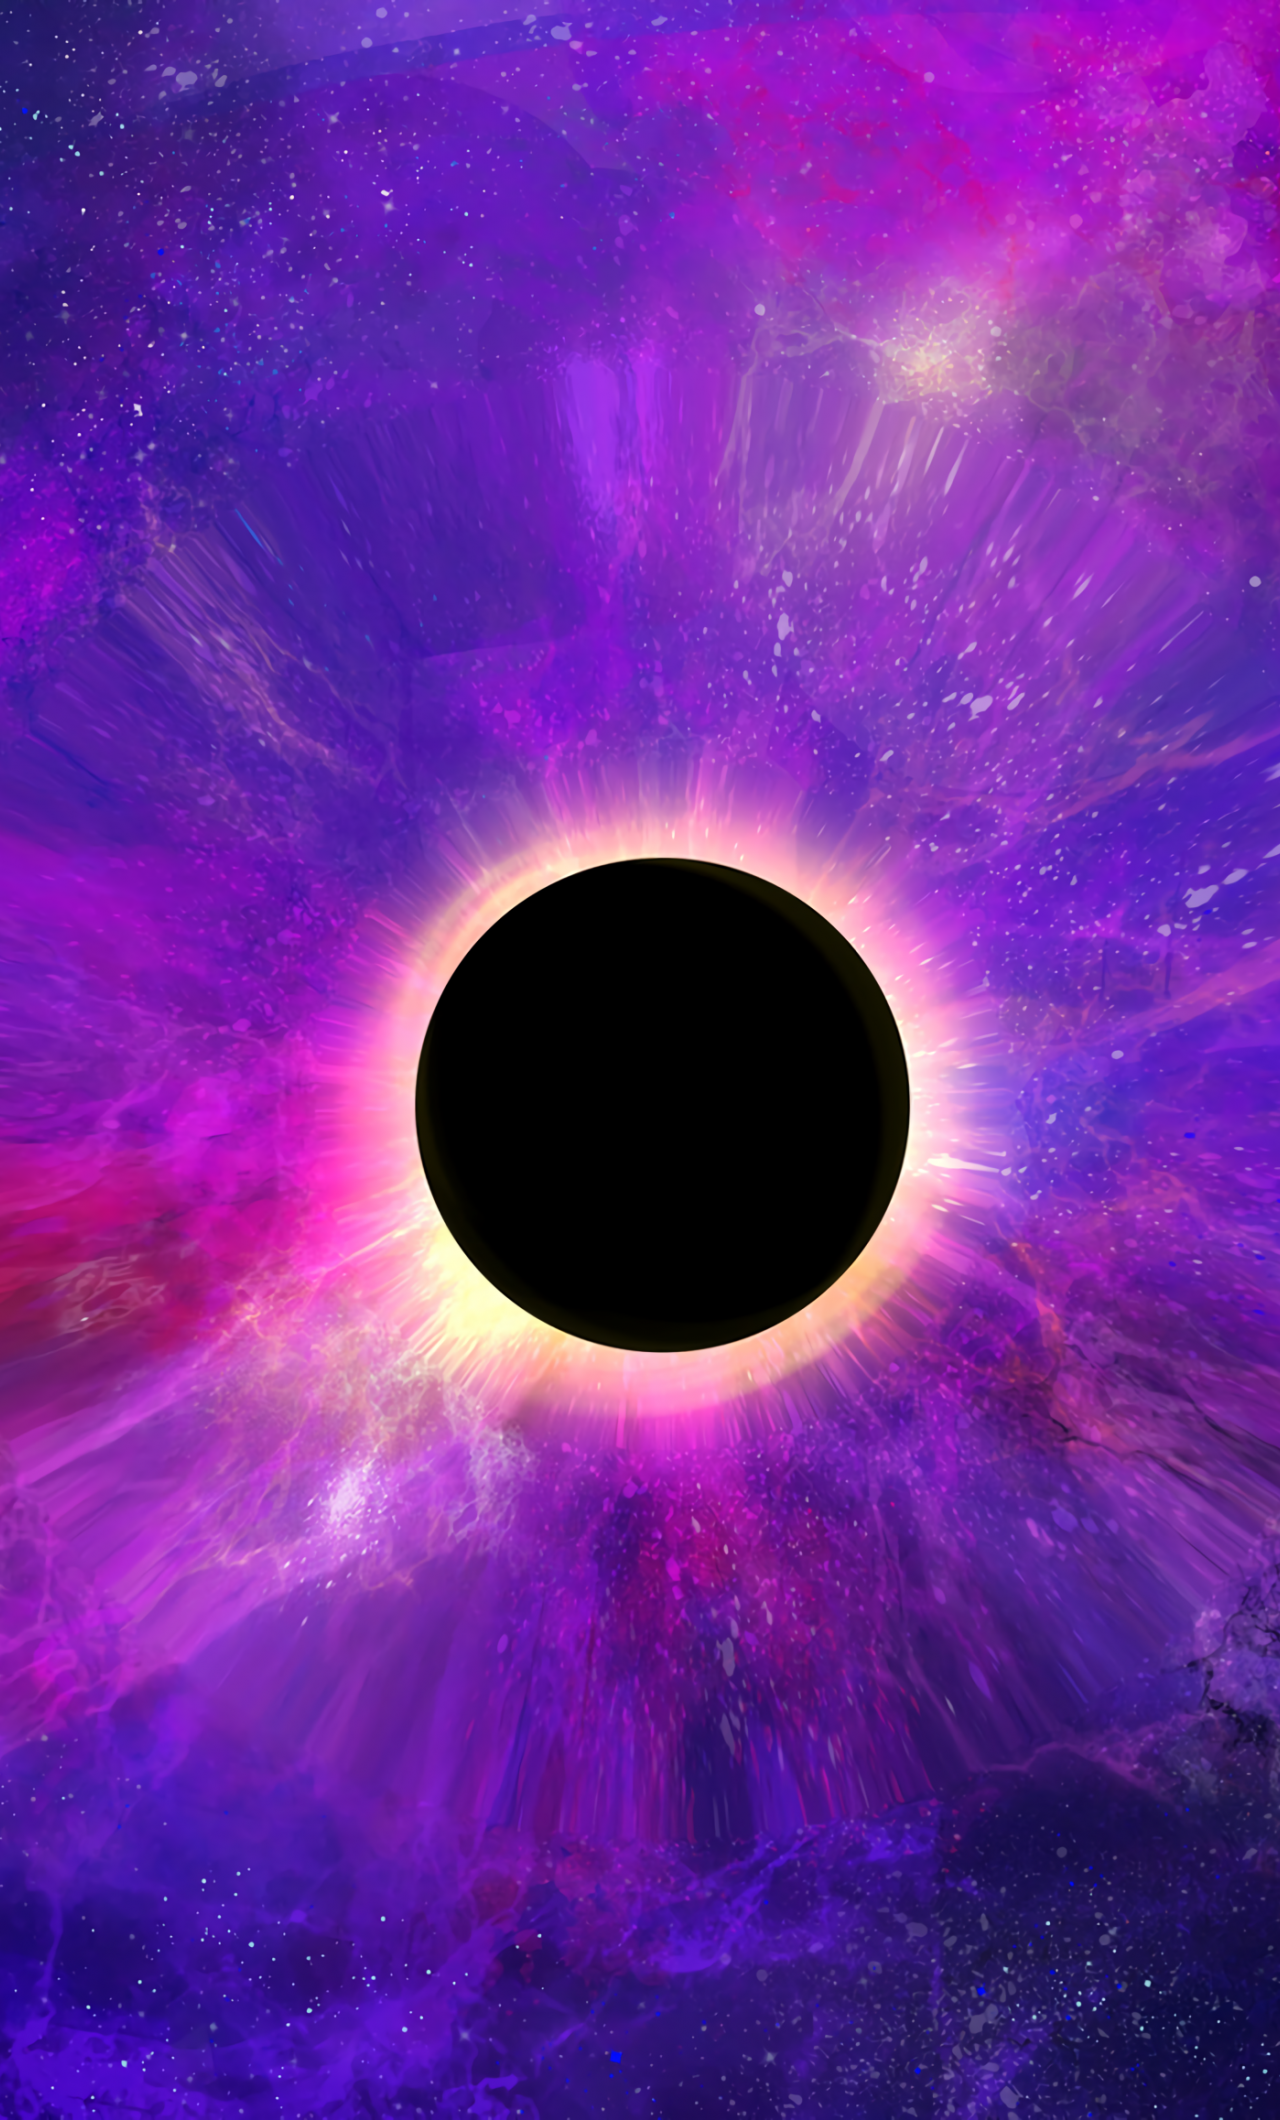 Black Hole Wallpapers 33 images inside